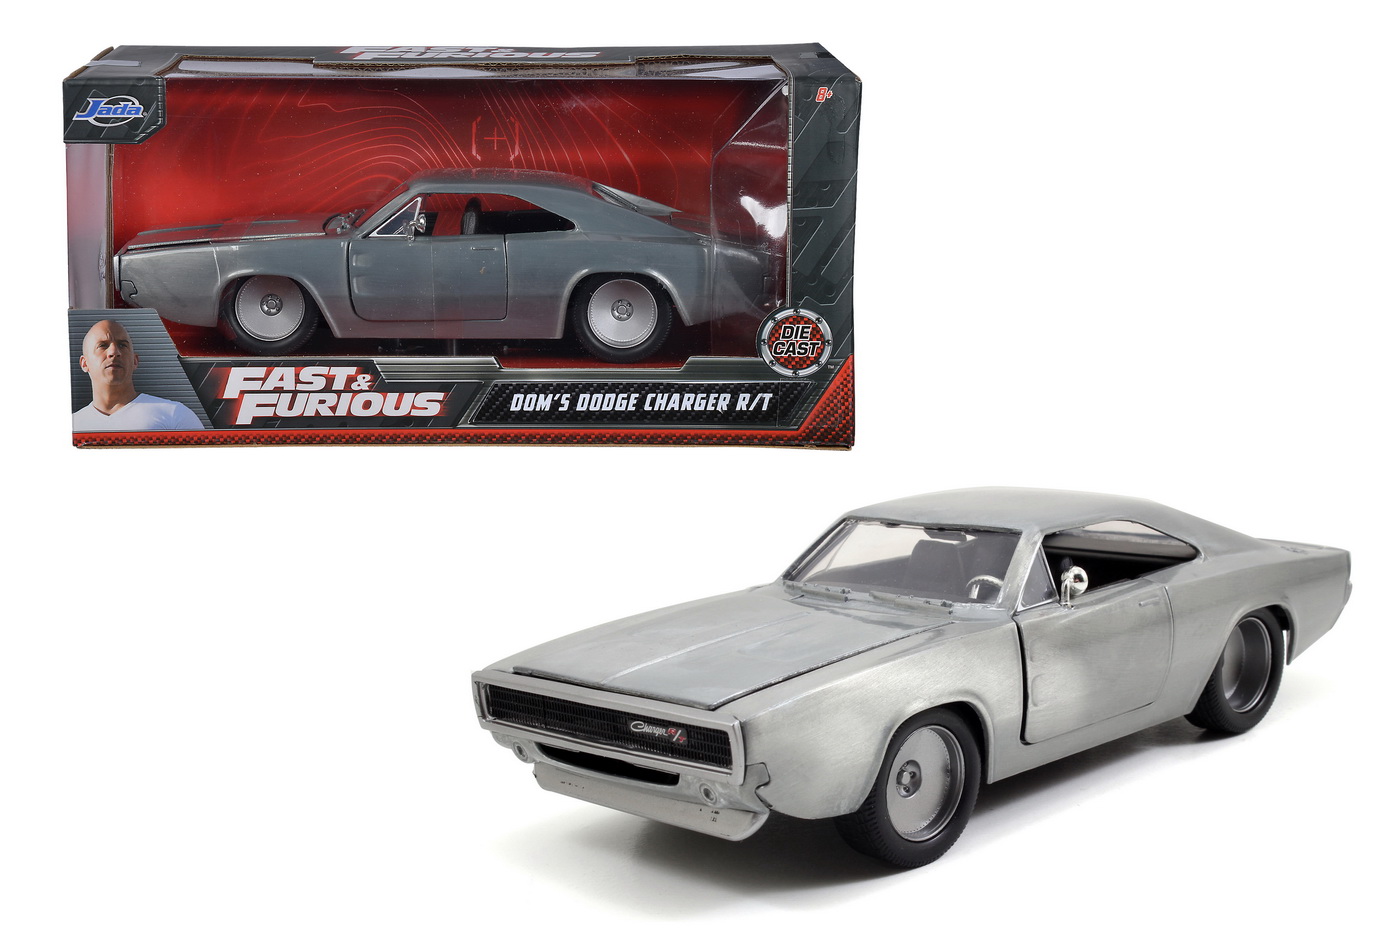 Masinuta Fast And Furious 1968 Dom’s Dodge Charger Scara 1:24